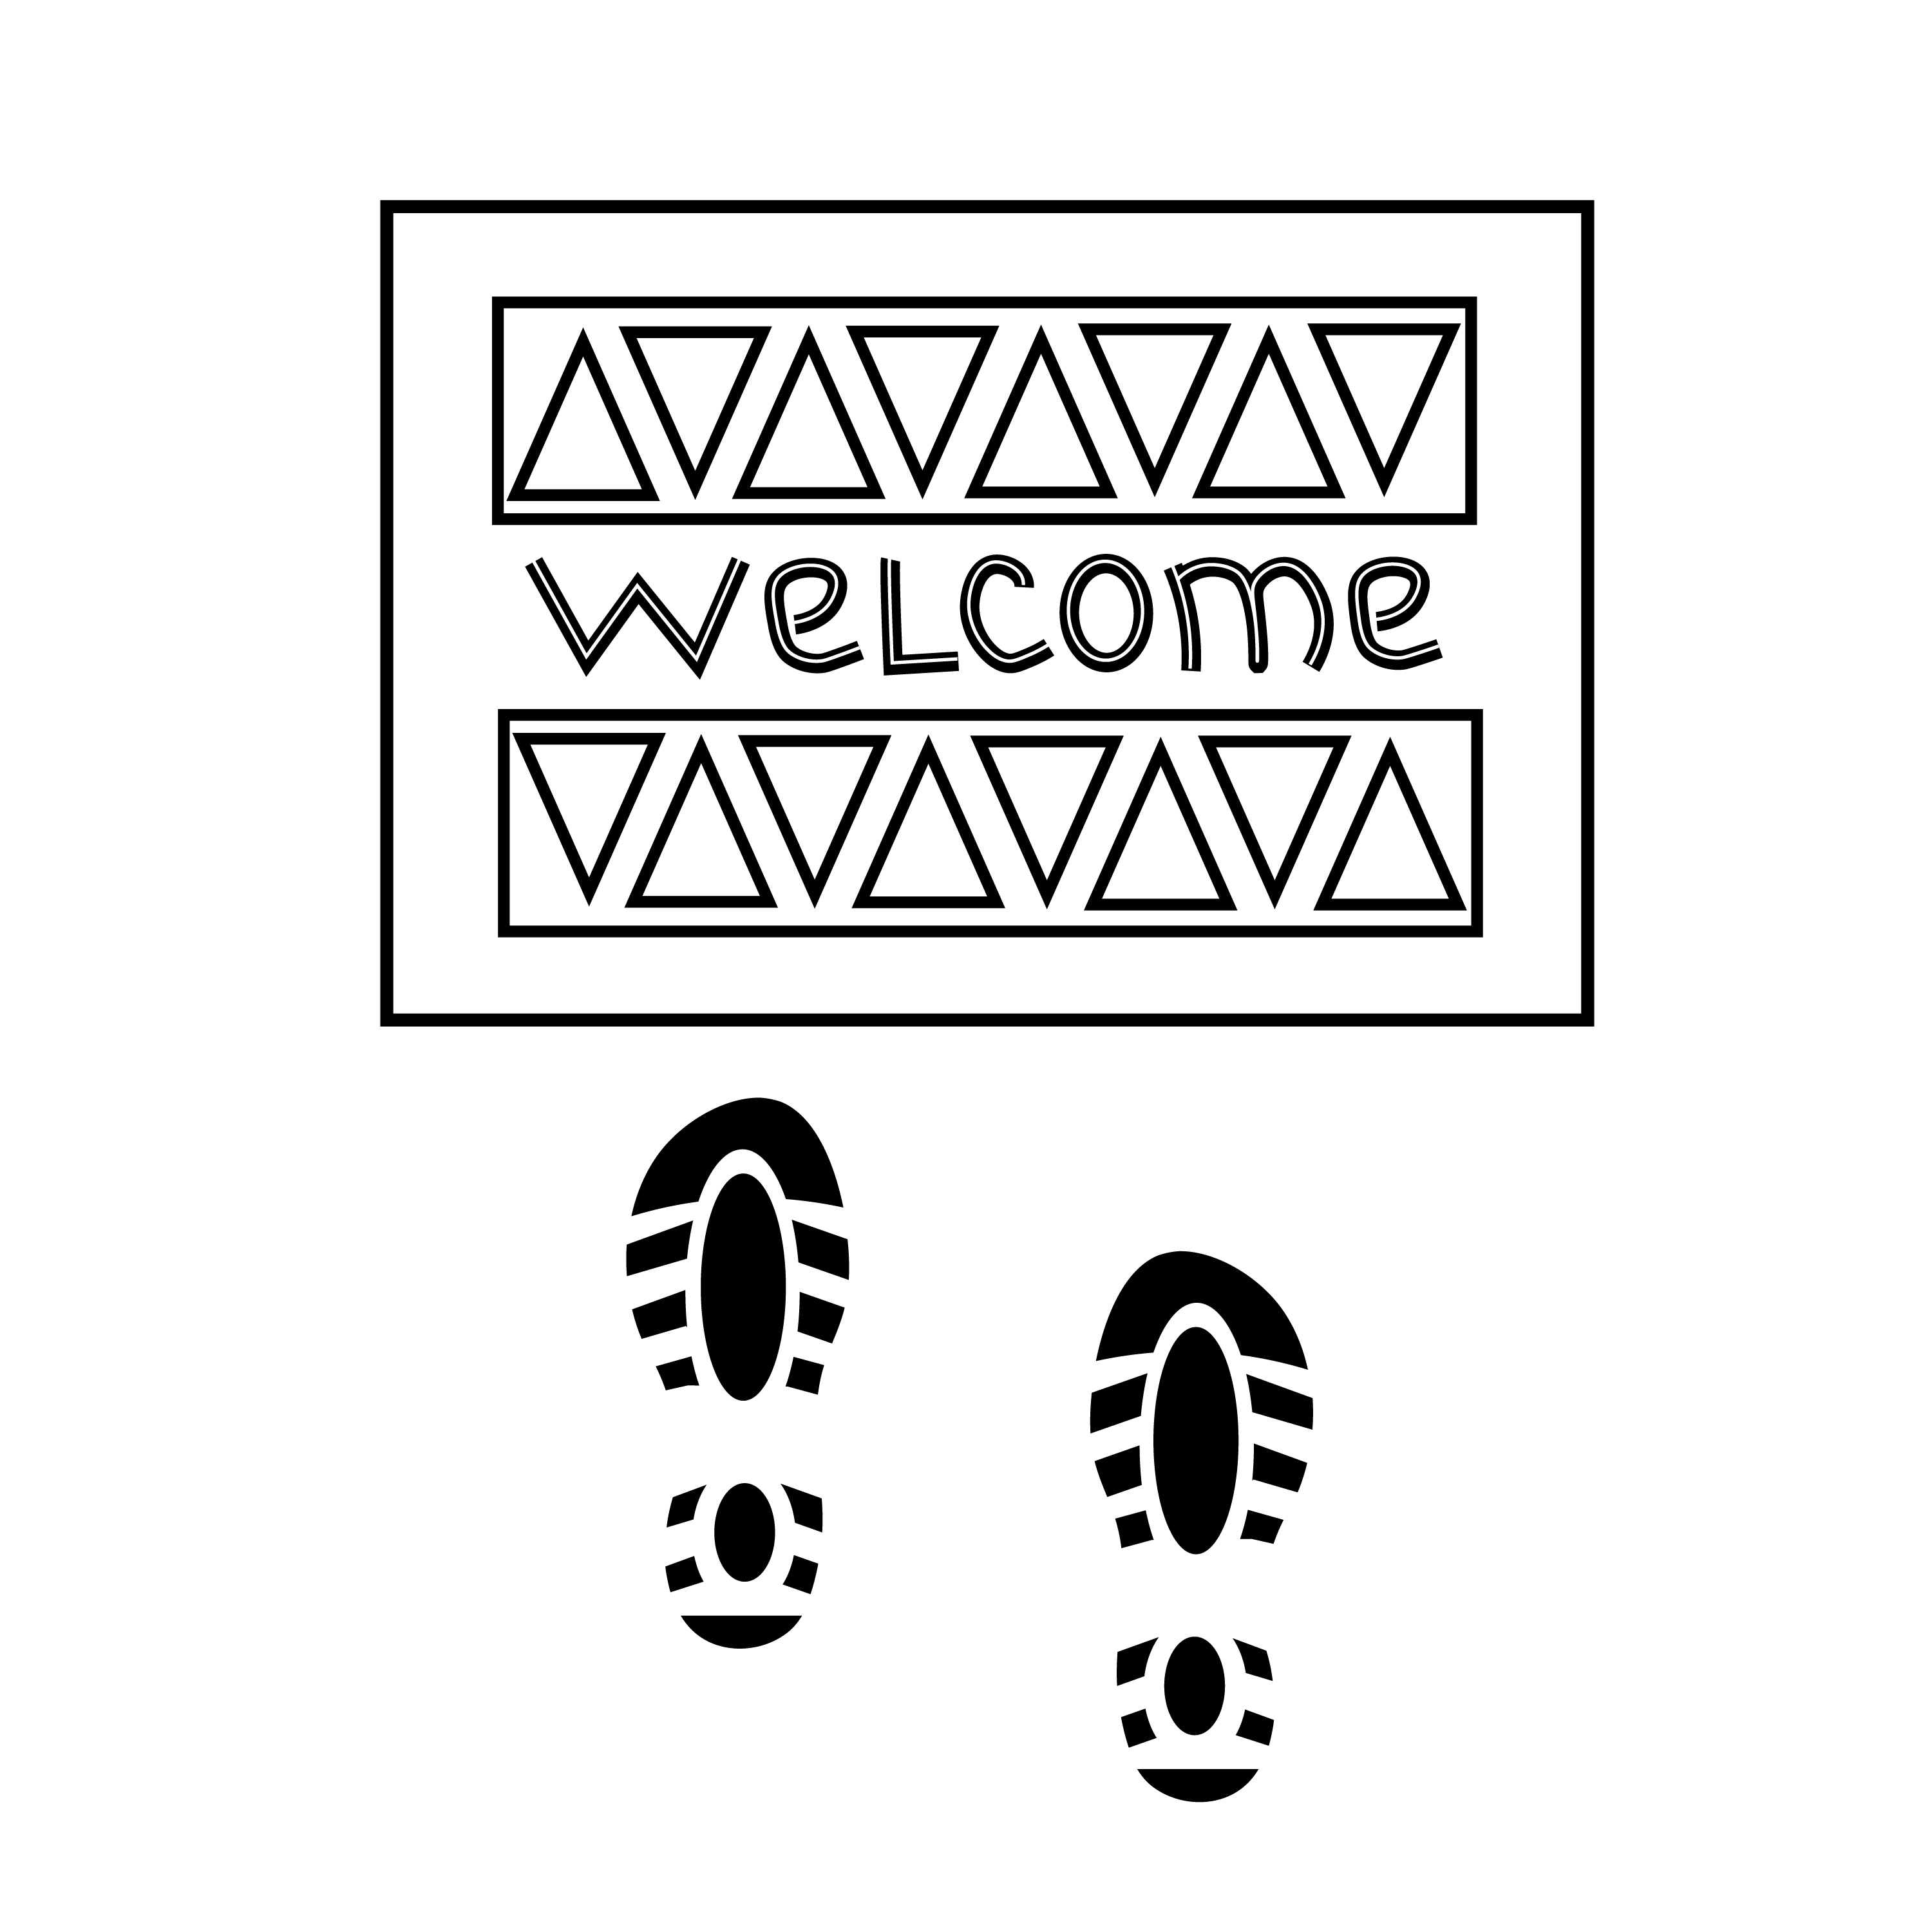 Door mat with welcome and footprints. Doodle illustration for printing, background, wallpaper, covers, packaging, greeting cards, posters, stickers, textile and seasonal design